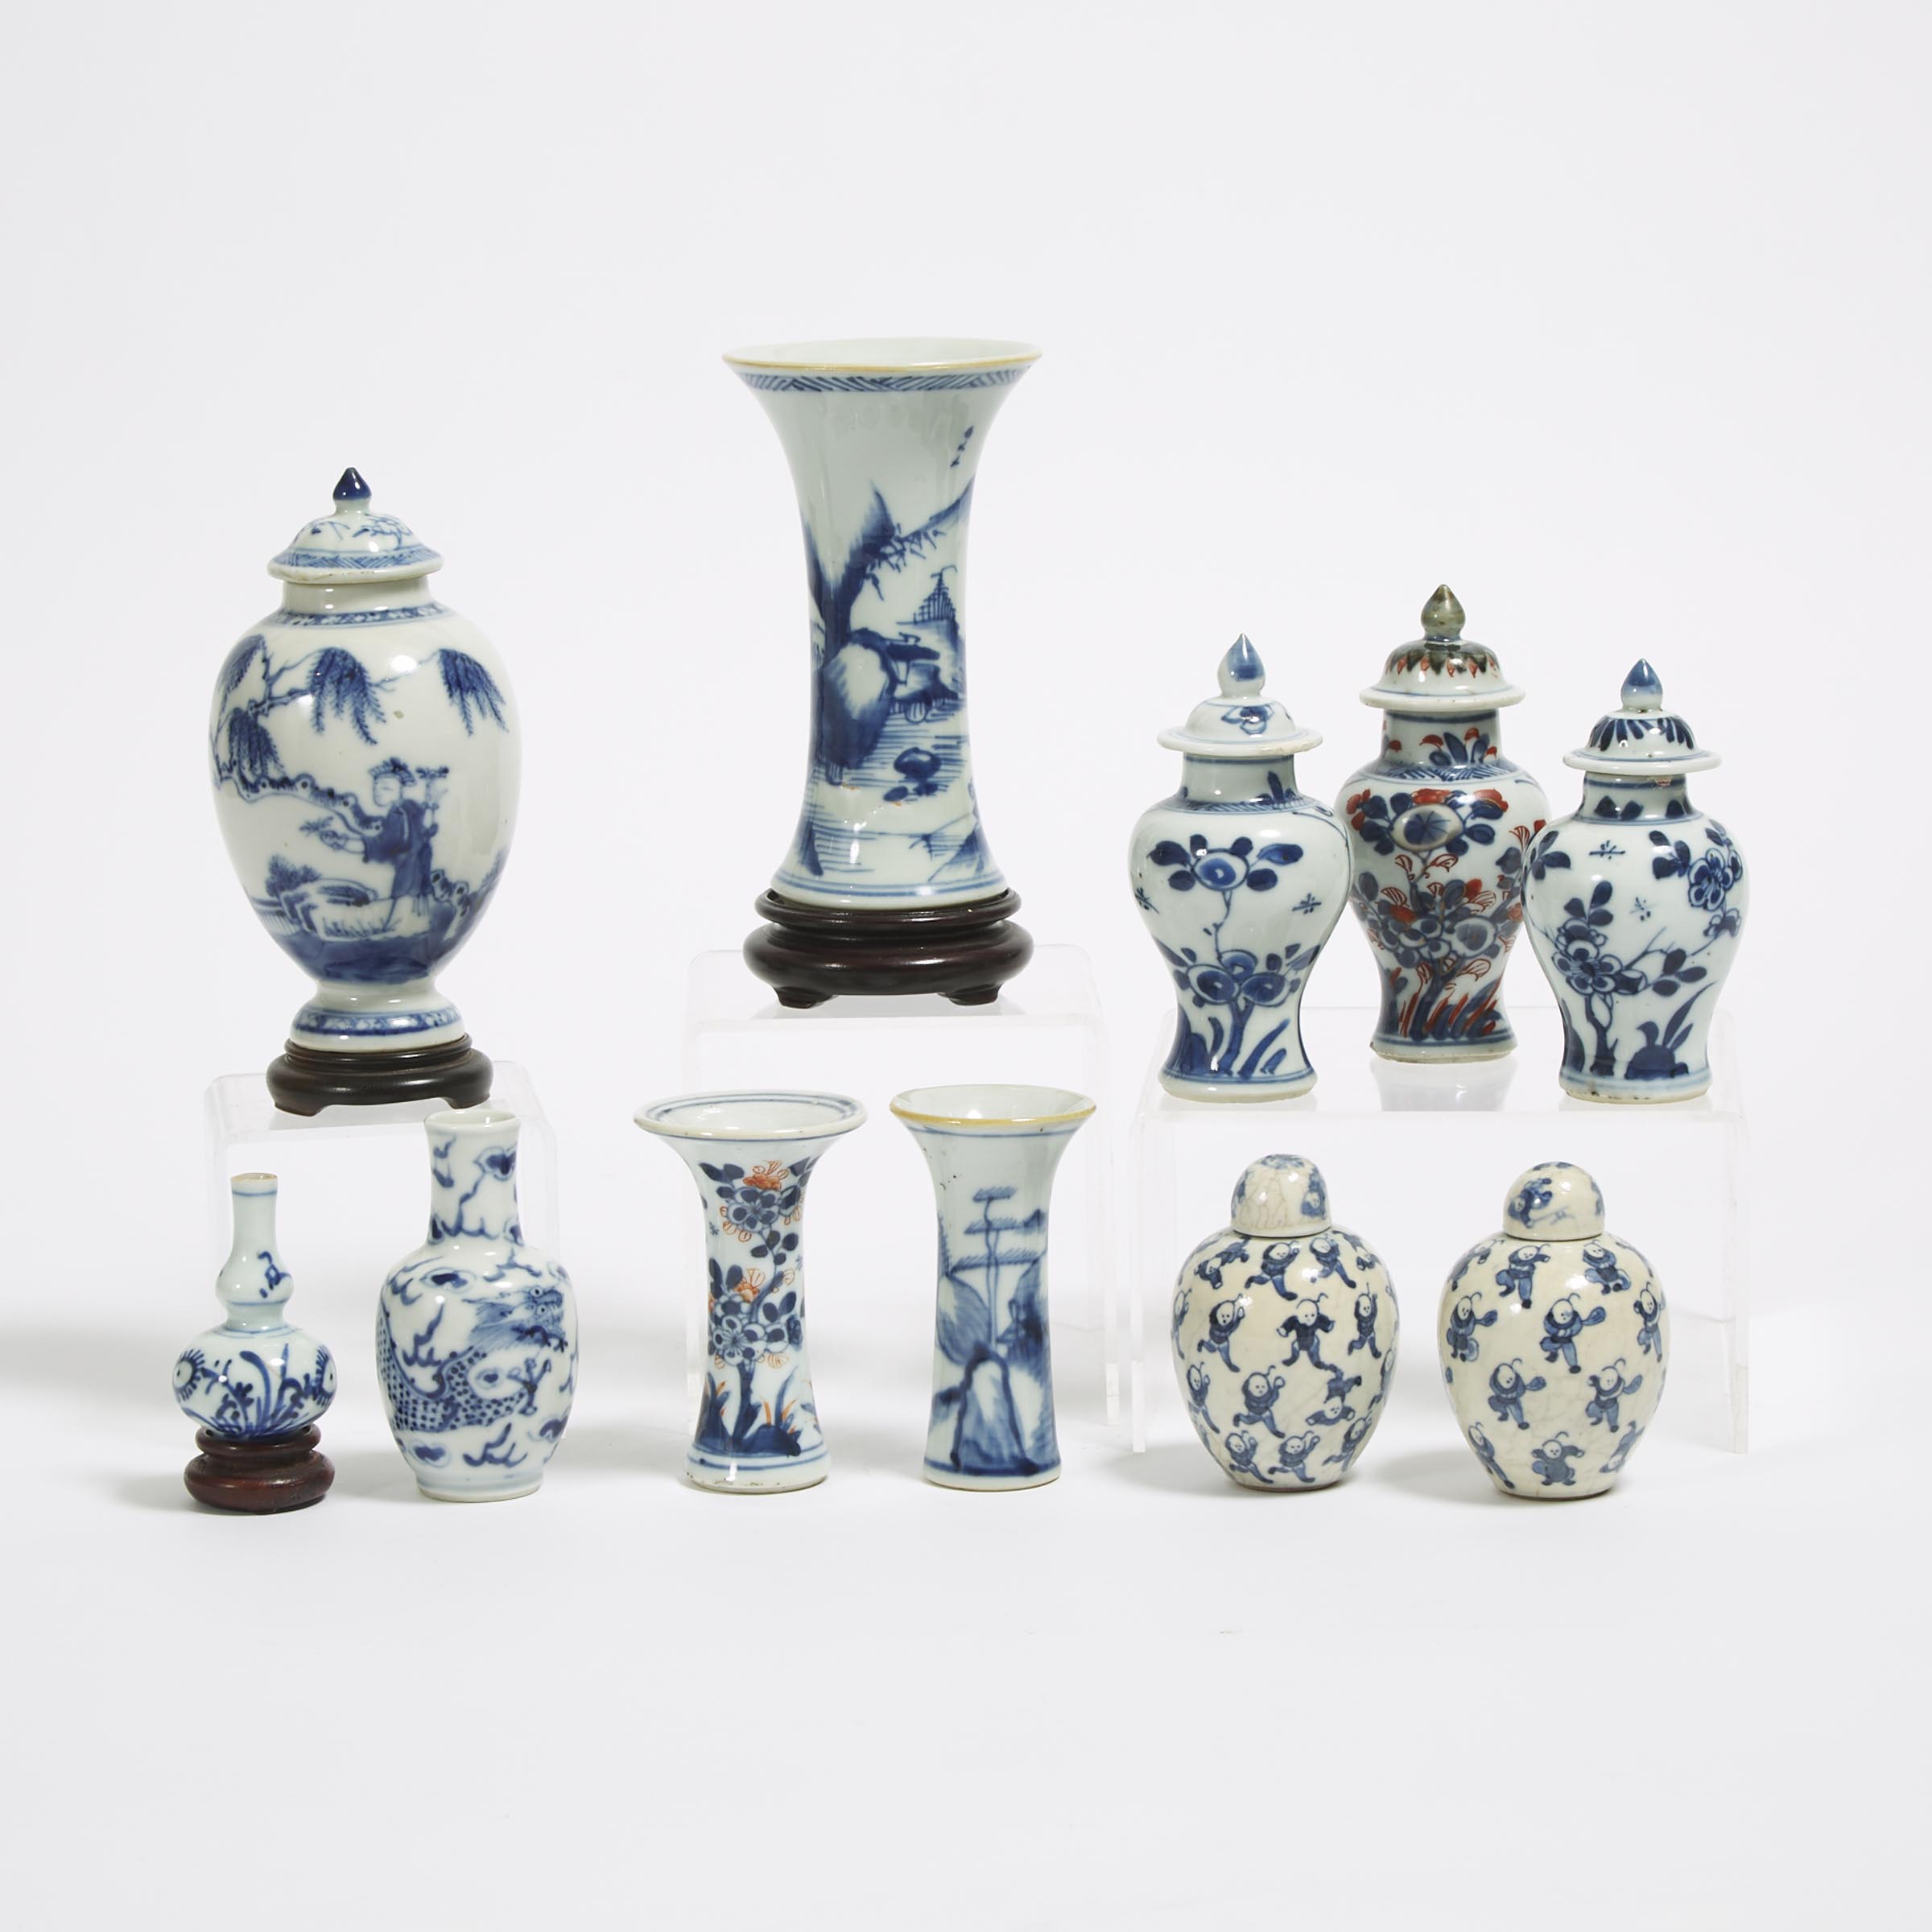 A Group of Eleven Miniature Blue and White Garnitures, 19th Century